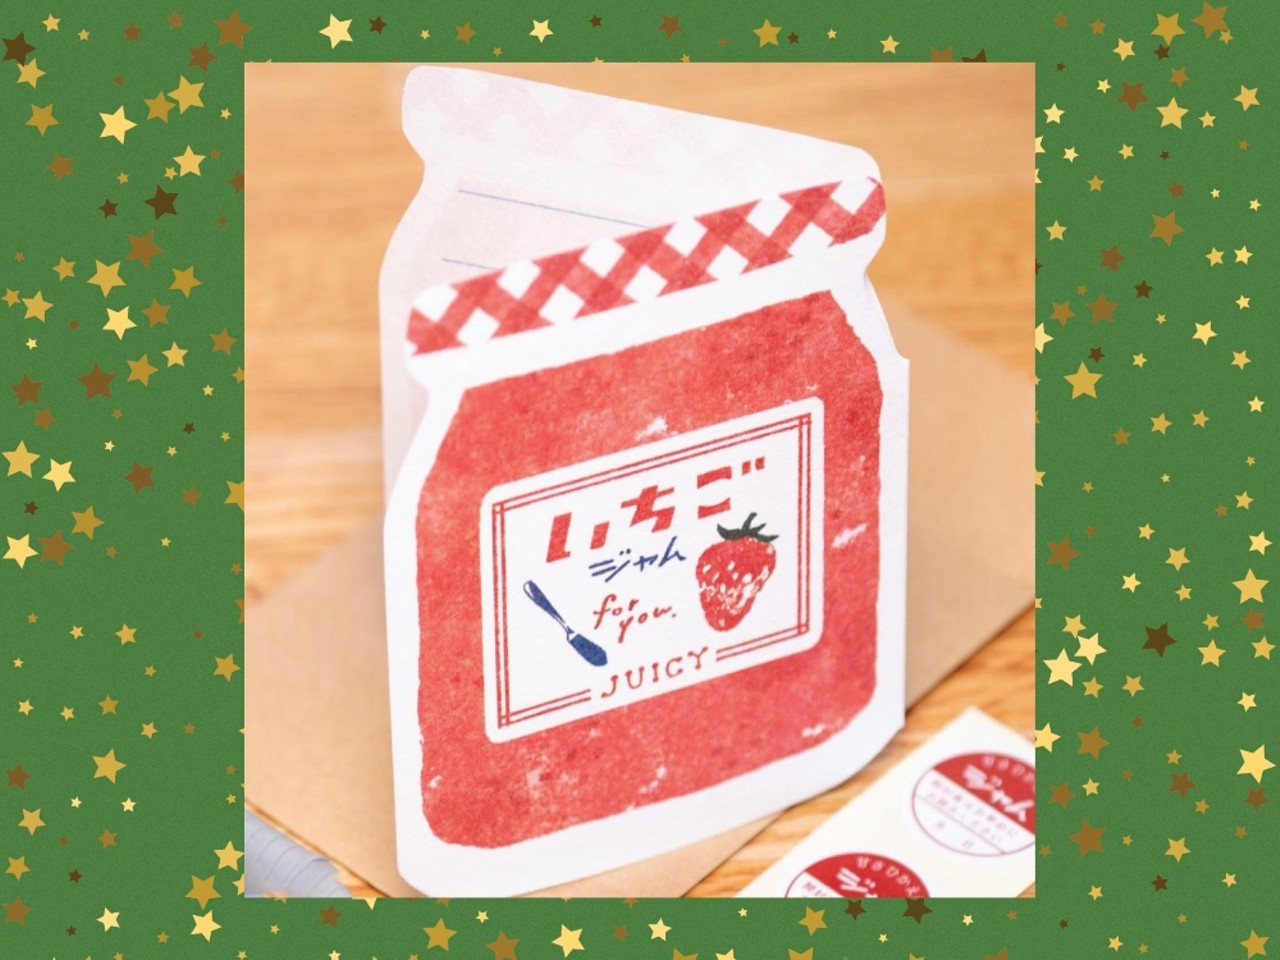 Strawberry Jam Notecards from St. Louis Art Supply: $4.95
(4532 Olive Street, , stlartsupply.com)
Send your loved ones a sweet note with these Strawberry Jam Notecards from St. Louis Art Supply created with washi paper from Japan.
Photo credit: St. Louis Art Supply